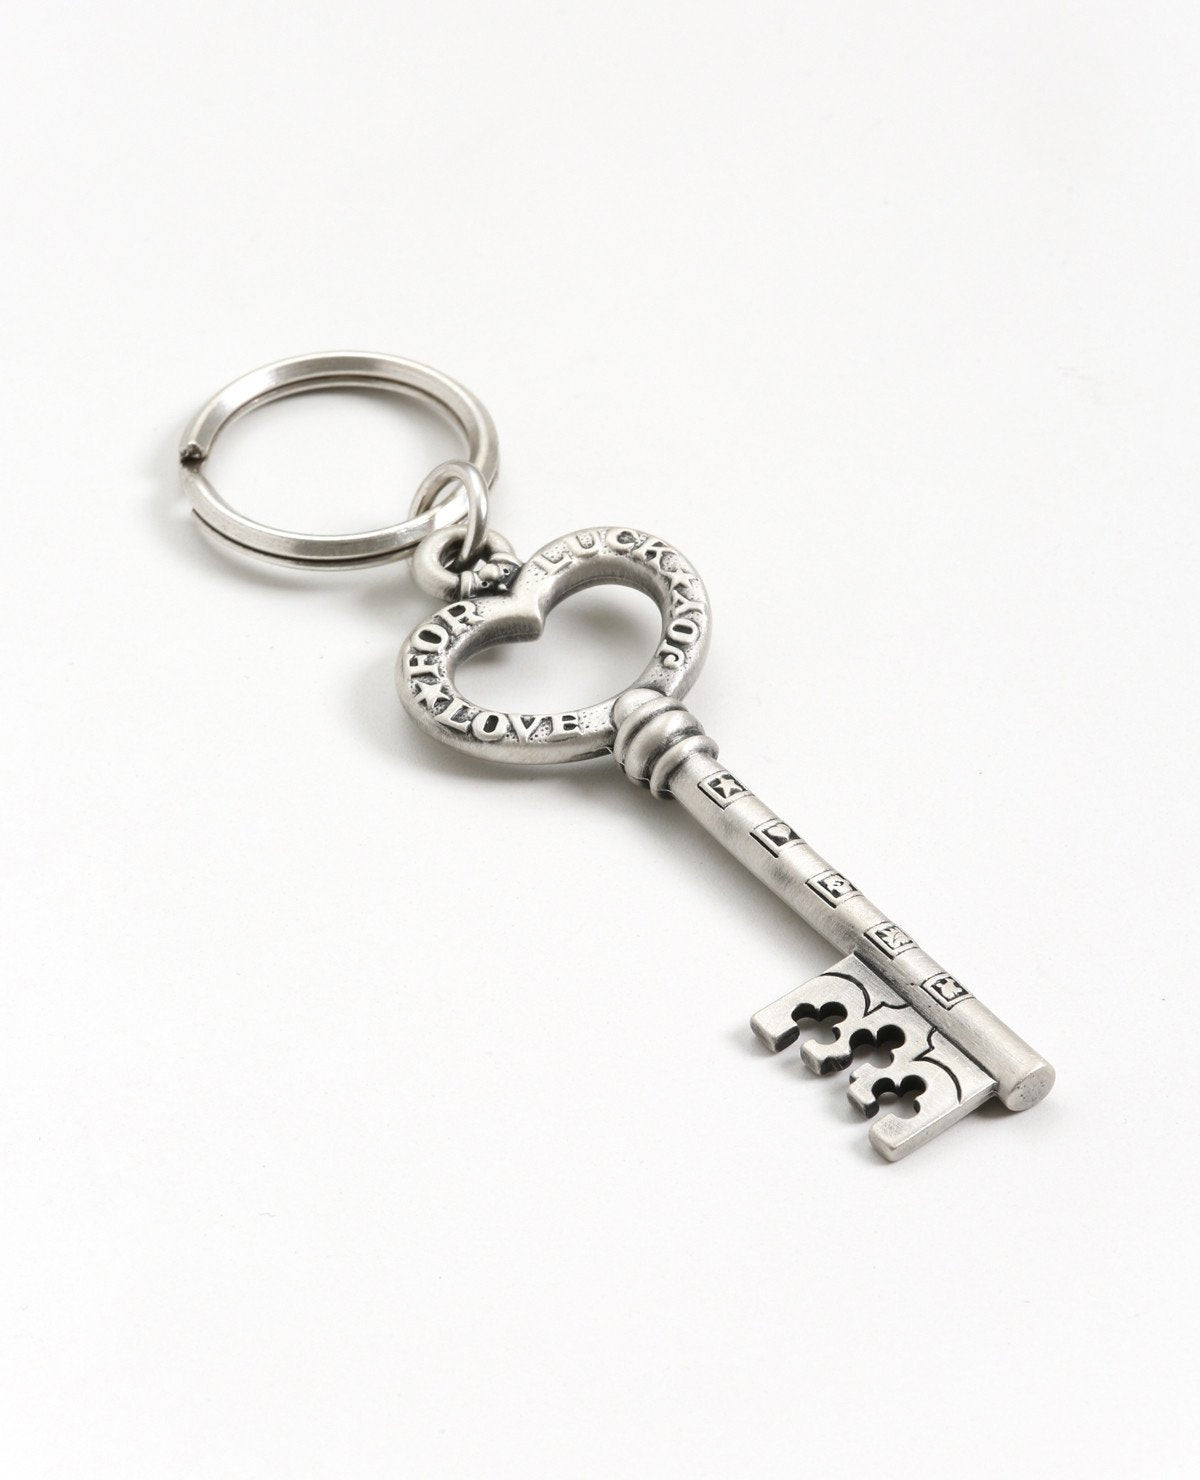 A pretty and impressively designed keychain in the shape of a key with a heart. On one side it is delicately decorated in black, and on the other side appear the words: For Luck, Love, Joy.
A special and joyful gift that's always good to have in your pocket. For English speakers in Israel and abroad, a useful reminder of our loved ones and the blessings we hold for them in our heart. 
The keychain is coated in sterling silver, strong, reliable and oh so pretty!  Length: 9 cm  Width: 3 cm